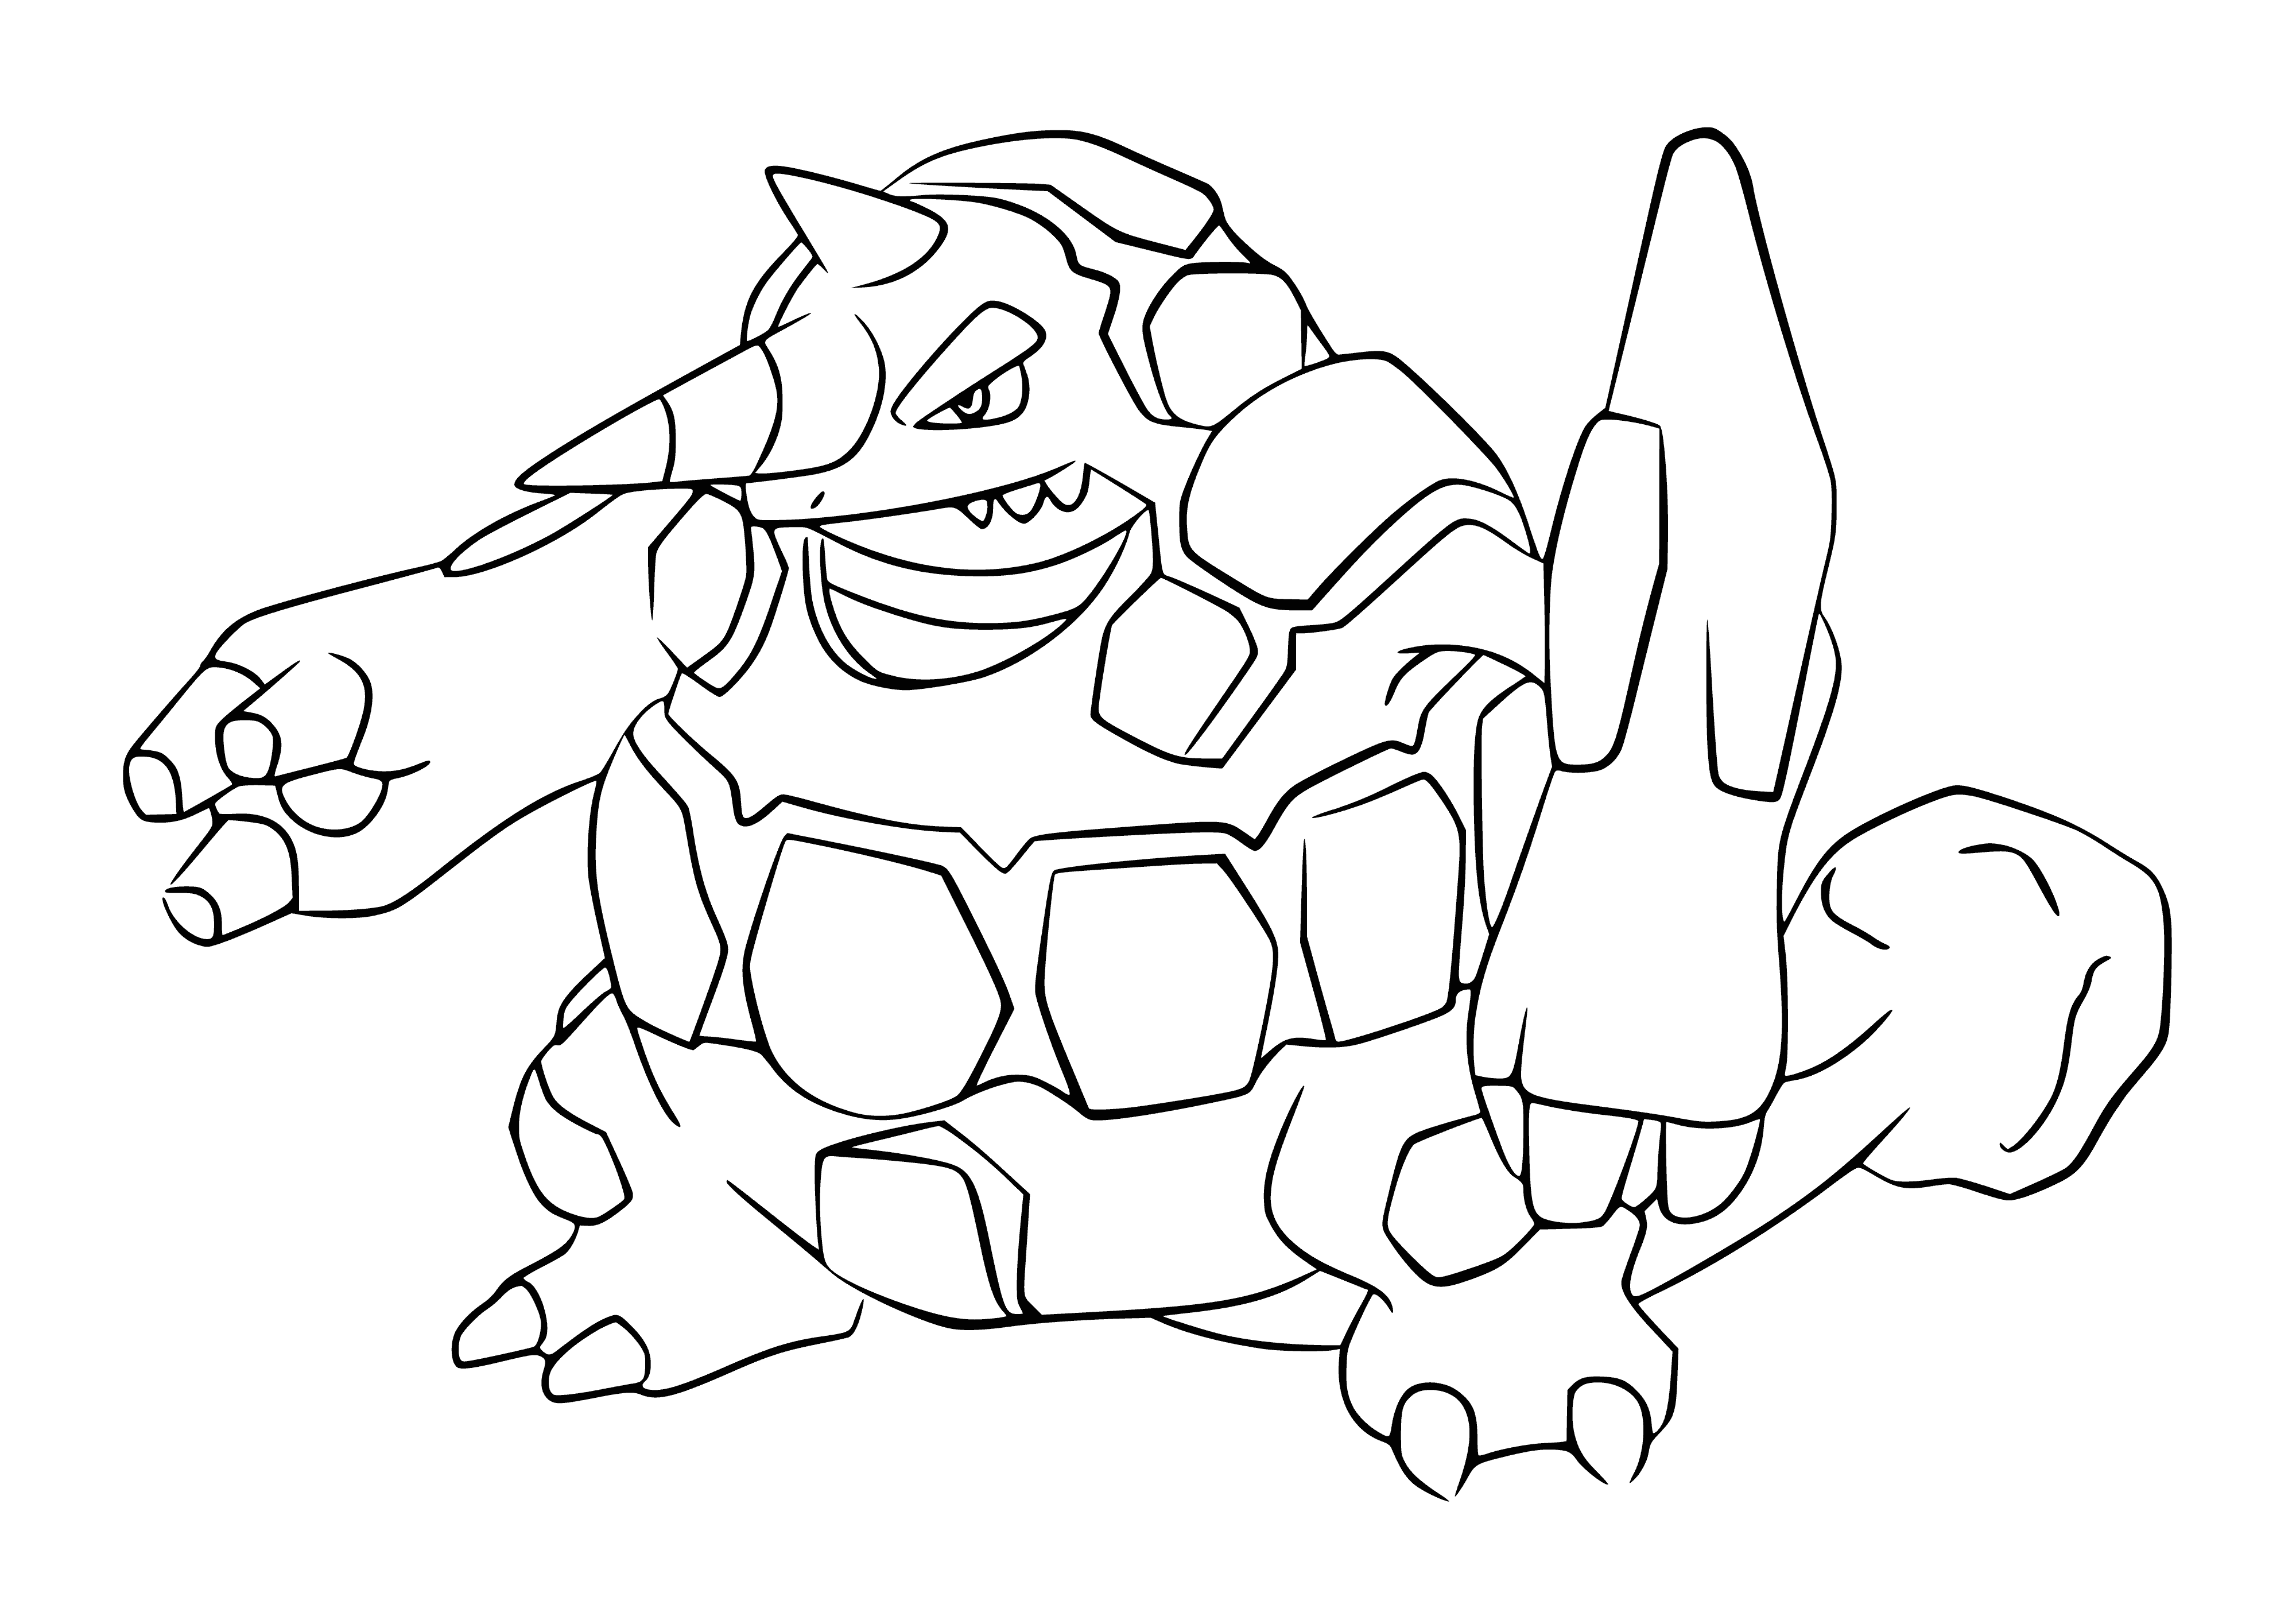 coloring page: Rajperior is a large, muscular Pokemon with a brown hide, white underbelly, two horns, a long tail, and four legs with three claws each. #Pokemon